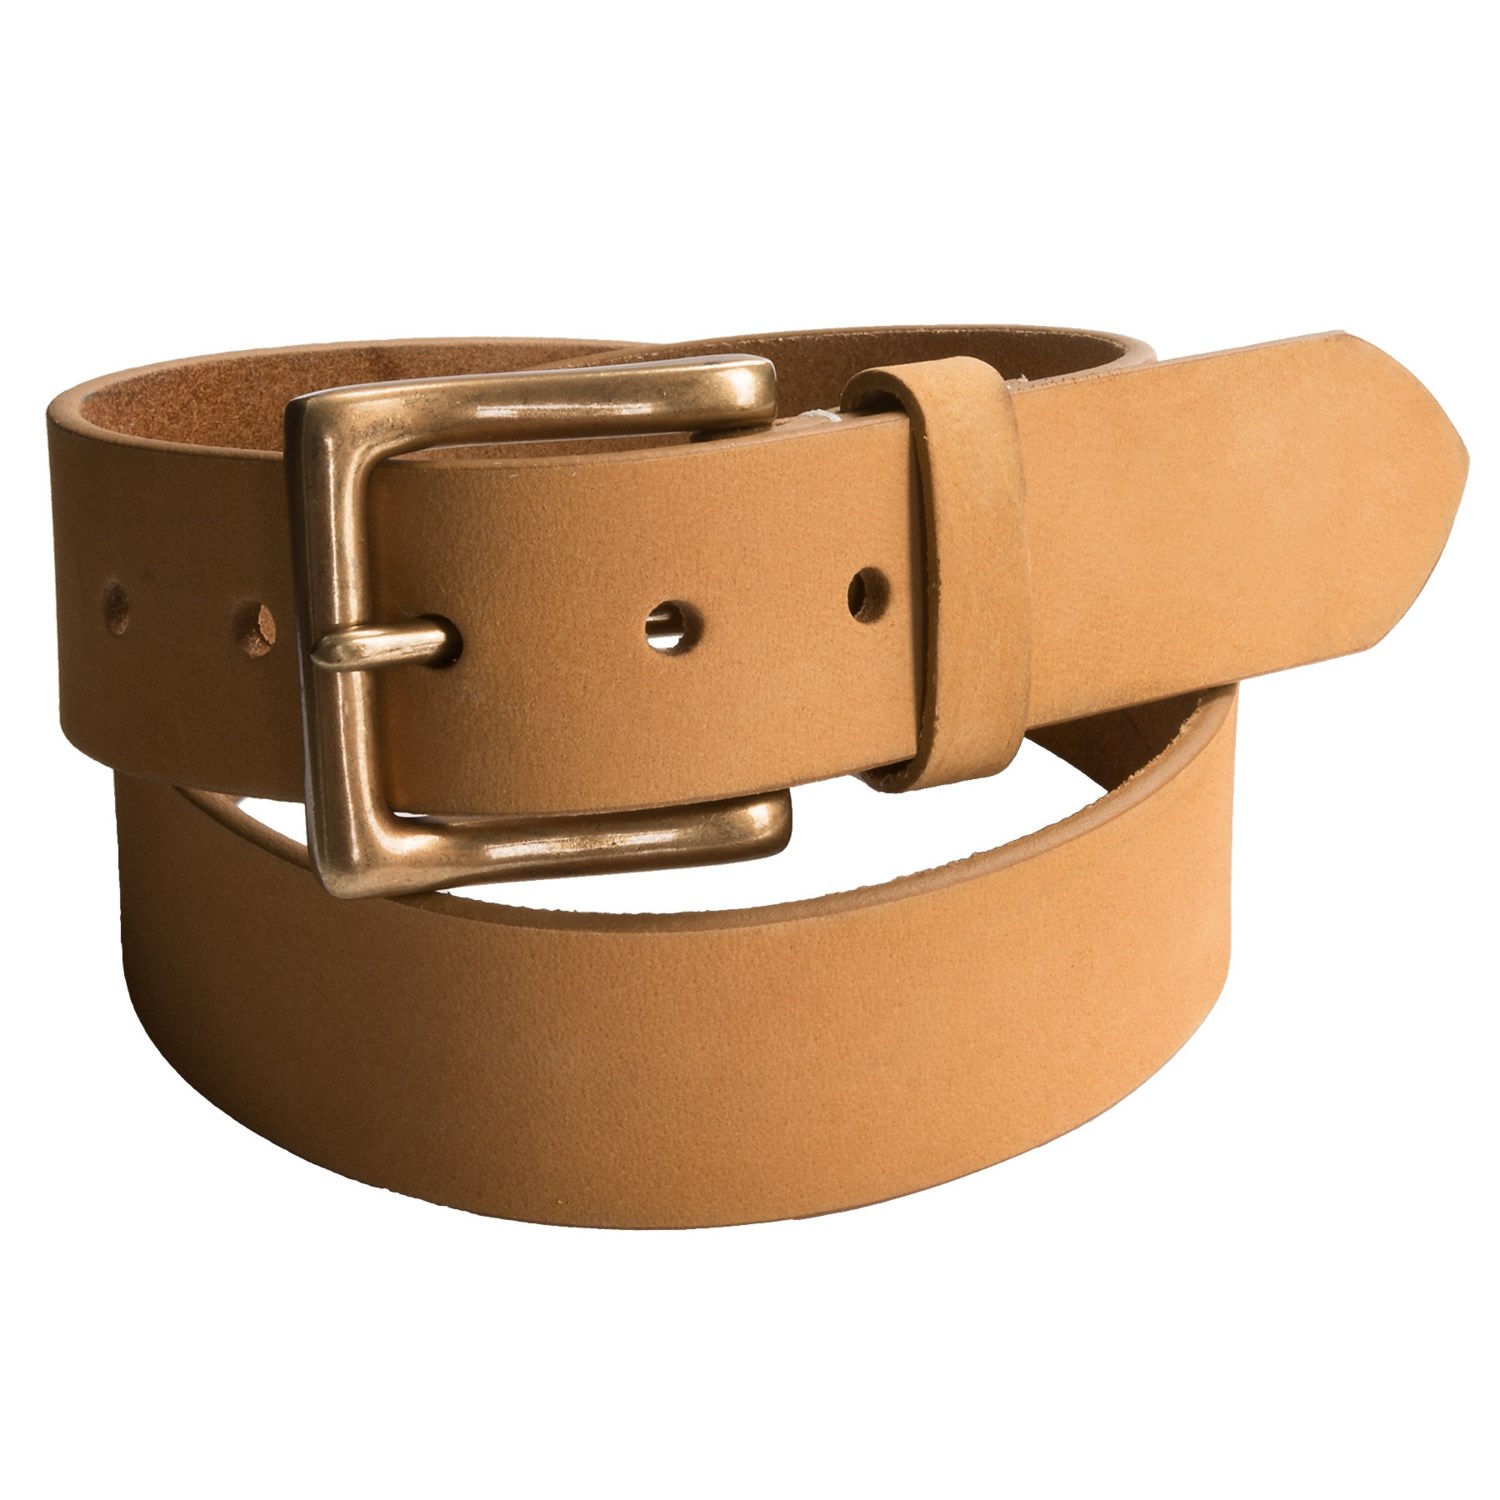 Timberland Boot-Leather Belt (For Men) - Save 86%